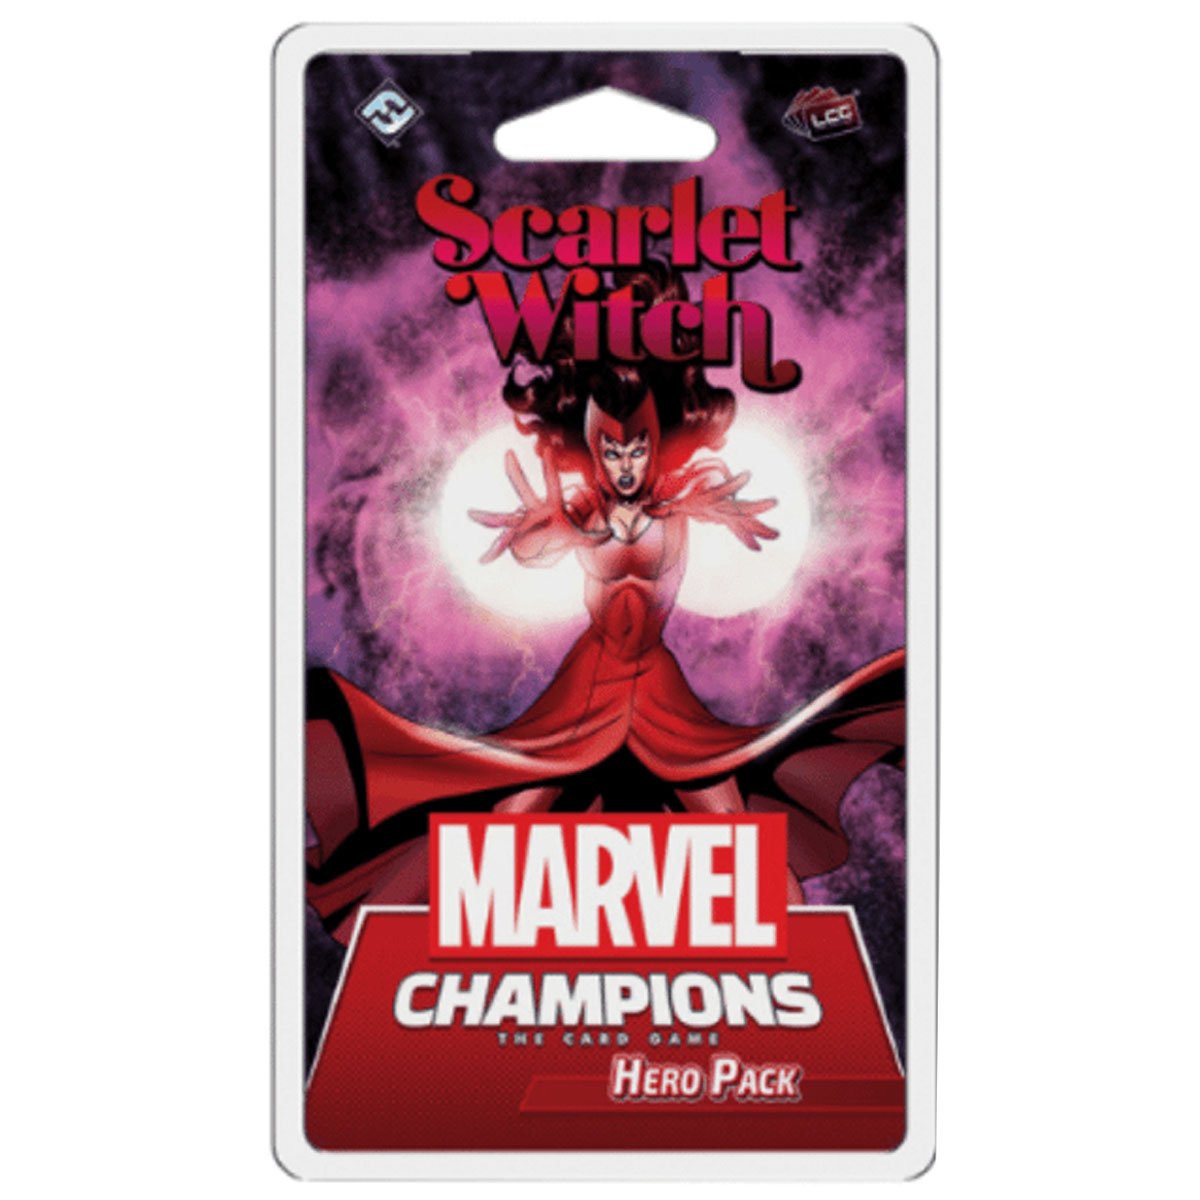 Scarlet Witch Hero Pack - Marvel Champions LCG